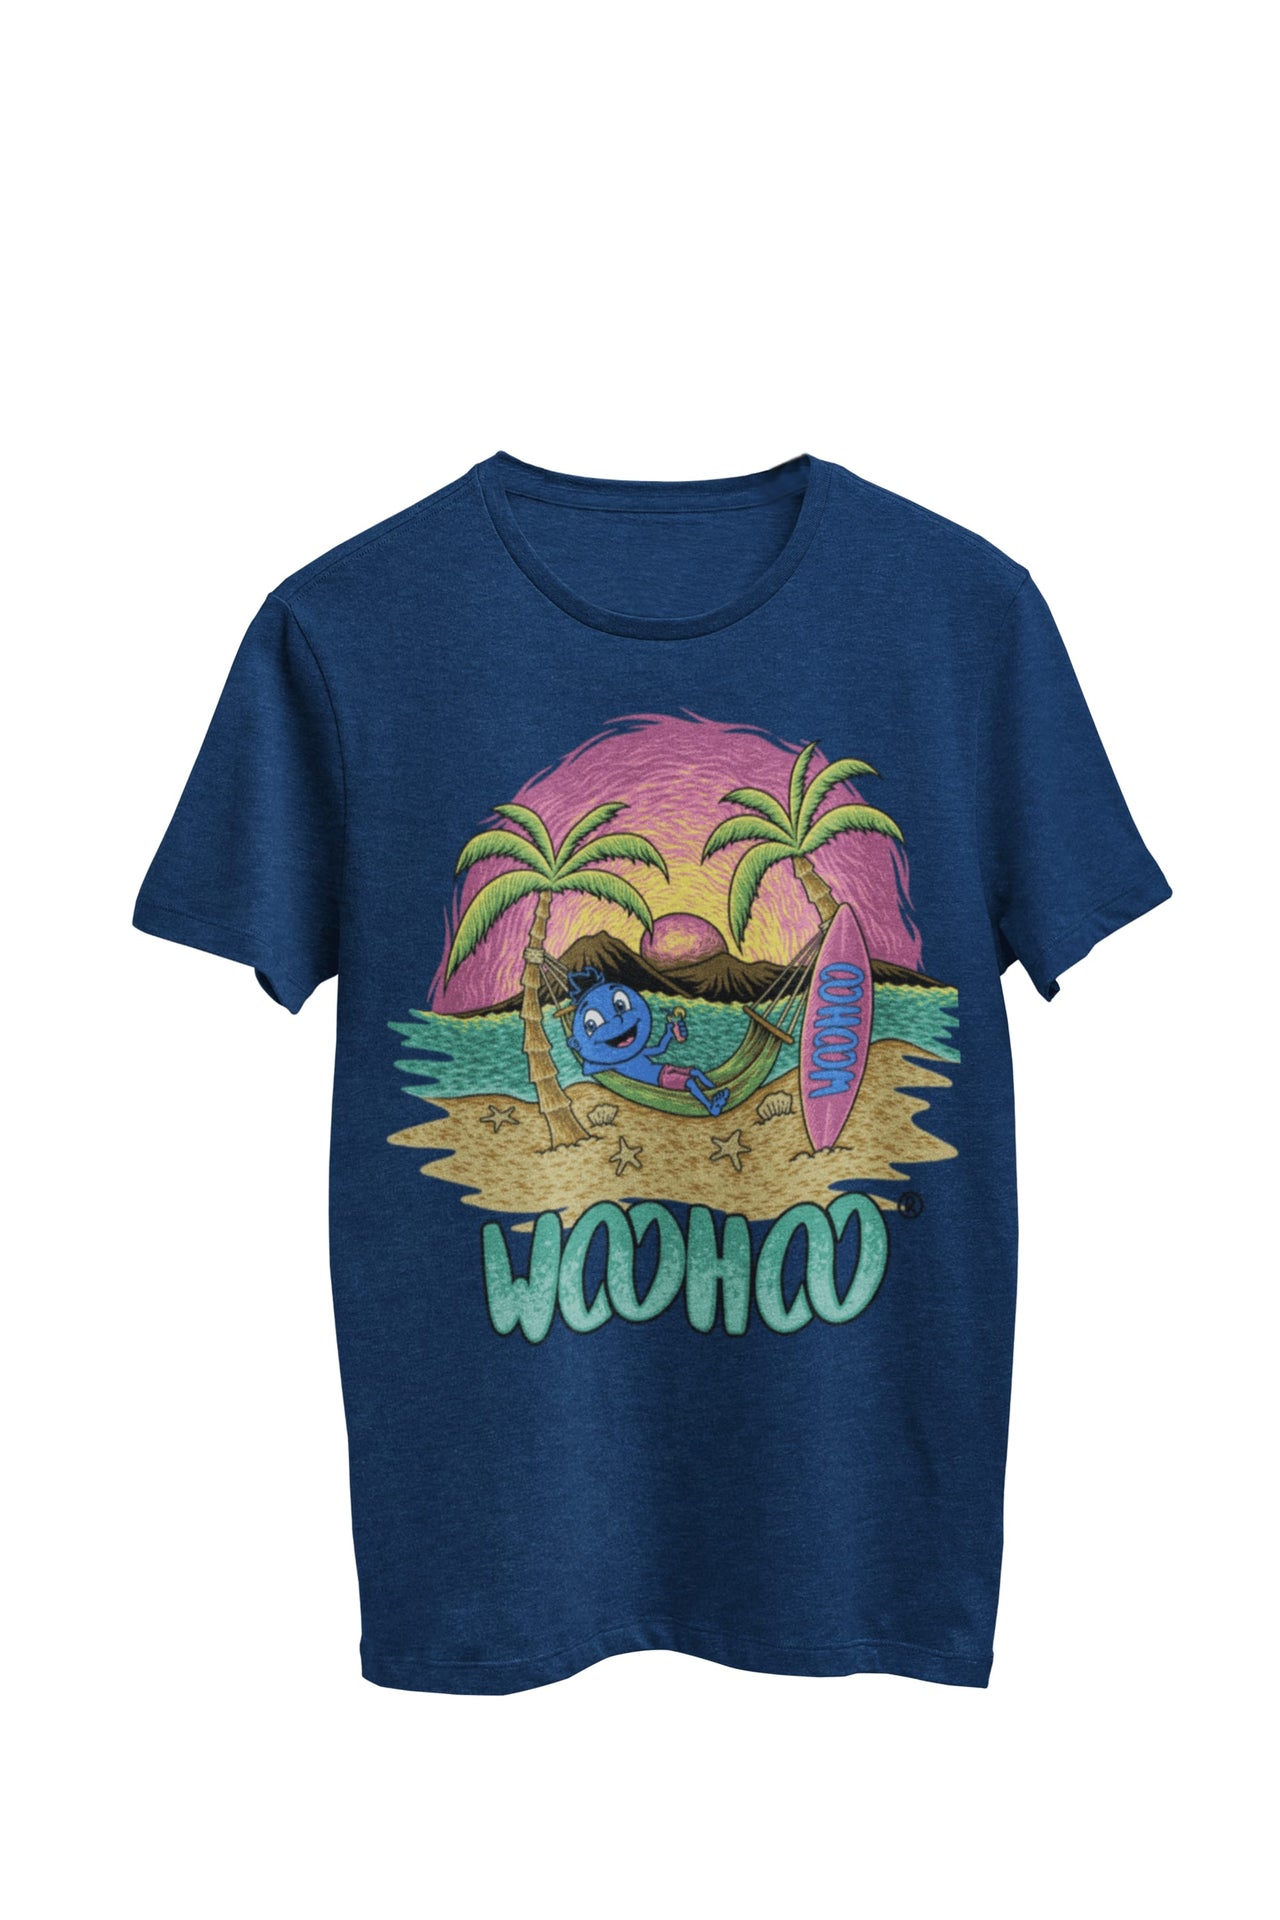 WooHooBerry embracing a relaxed beach moment, lounging in a hammock as his surfboard stands ready in the sand, symbolizing the anticipation of a surf session. Their navy T-shirt boldly presents the text 'WooHoo,' embodying the outdoor sports enthusiasm and carefree vibe of the scene.